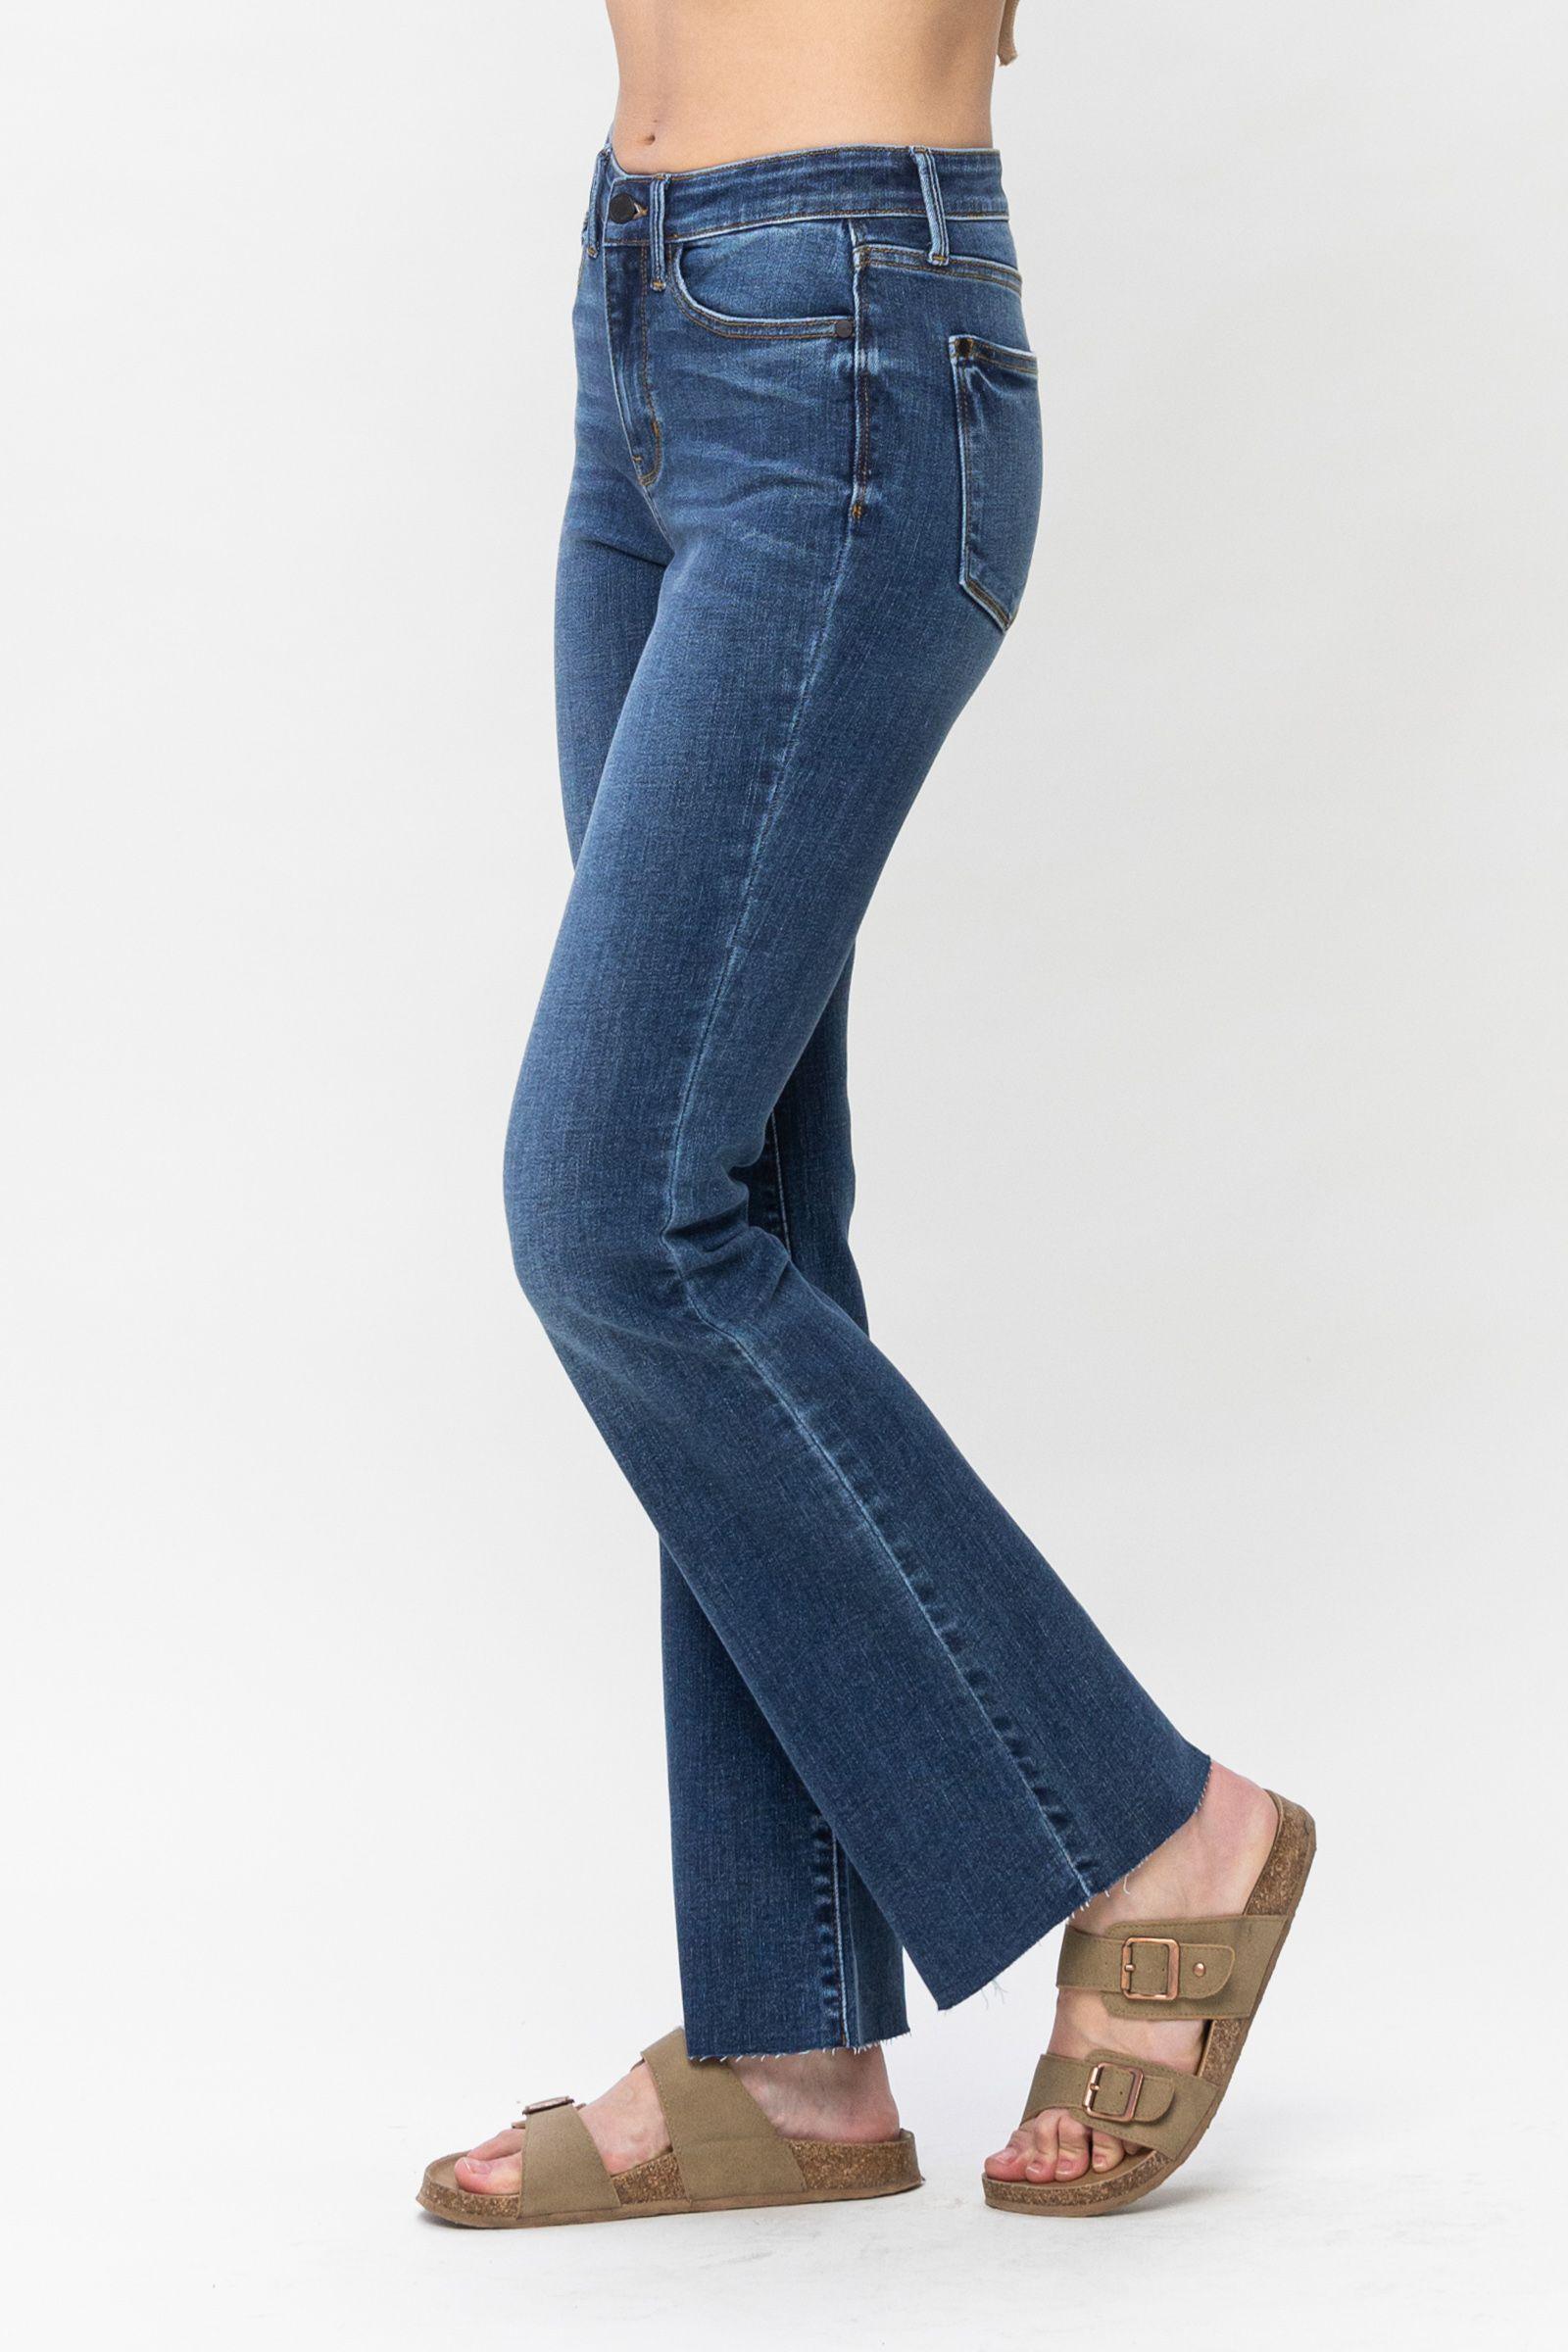 Judy Blue Midrise Bootcut Contrast Wash - Strawberry Moon Boutique